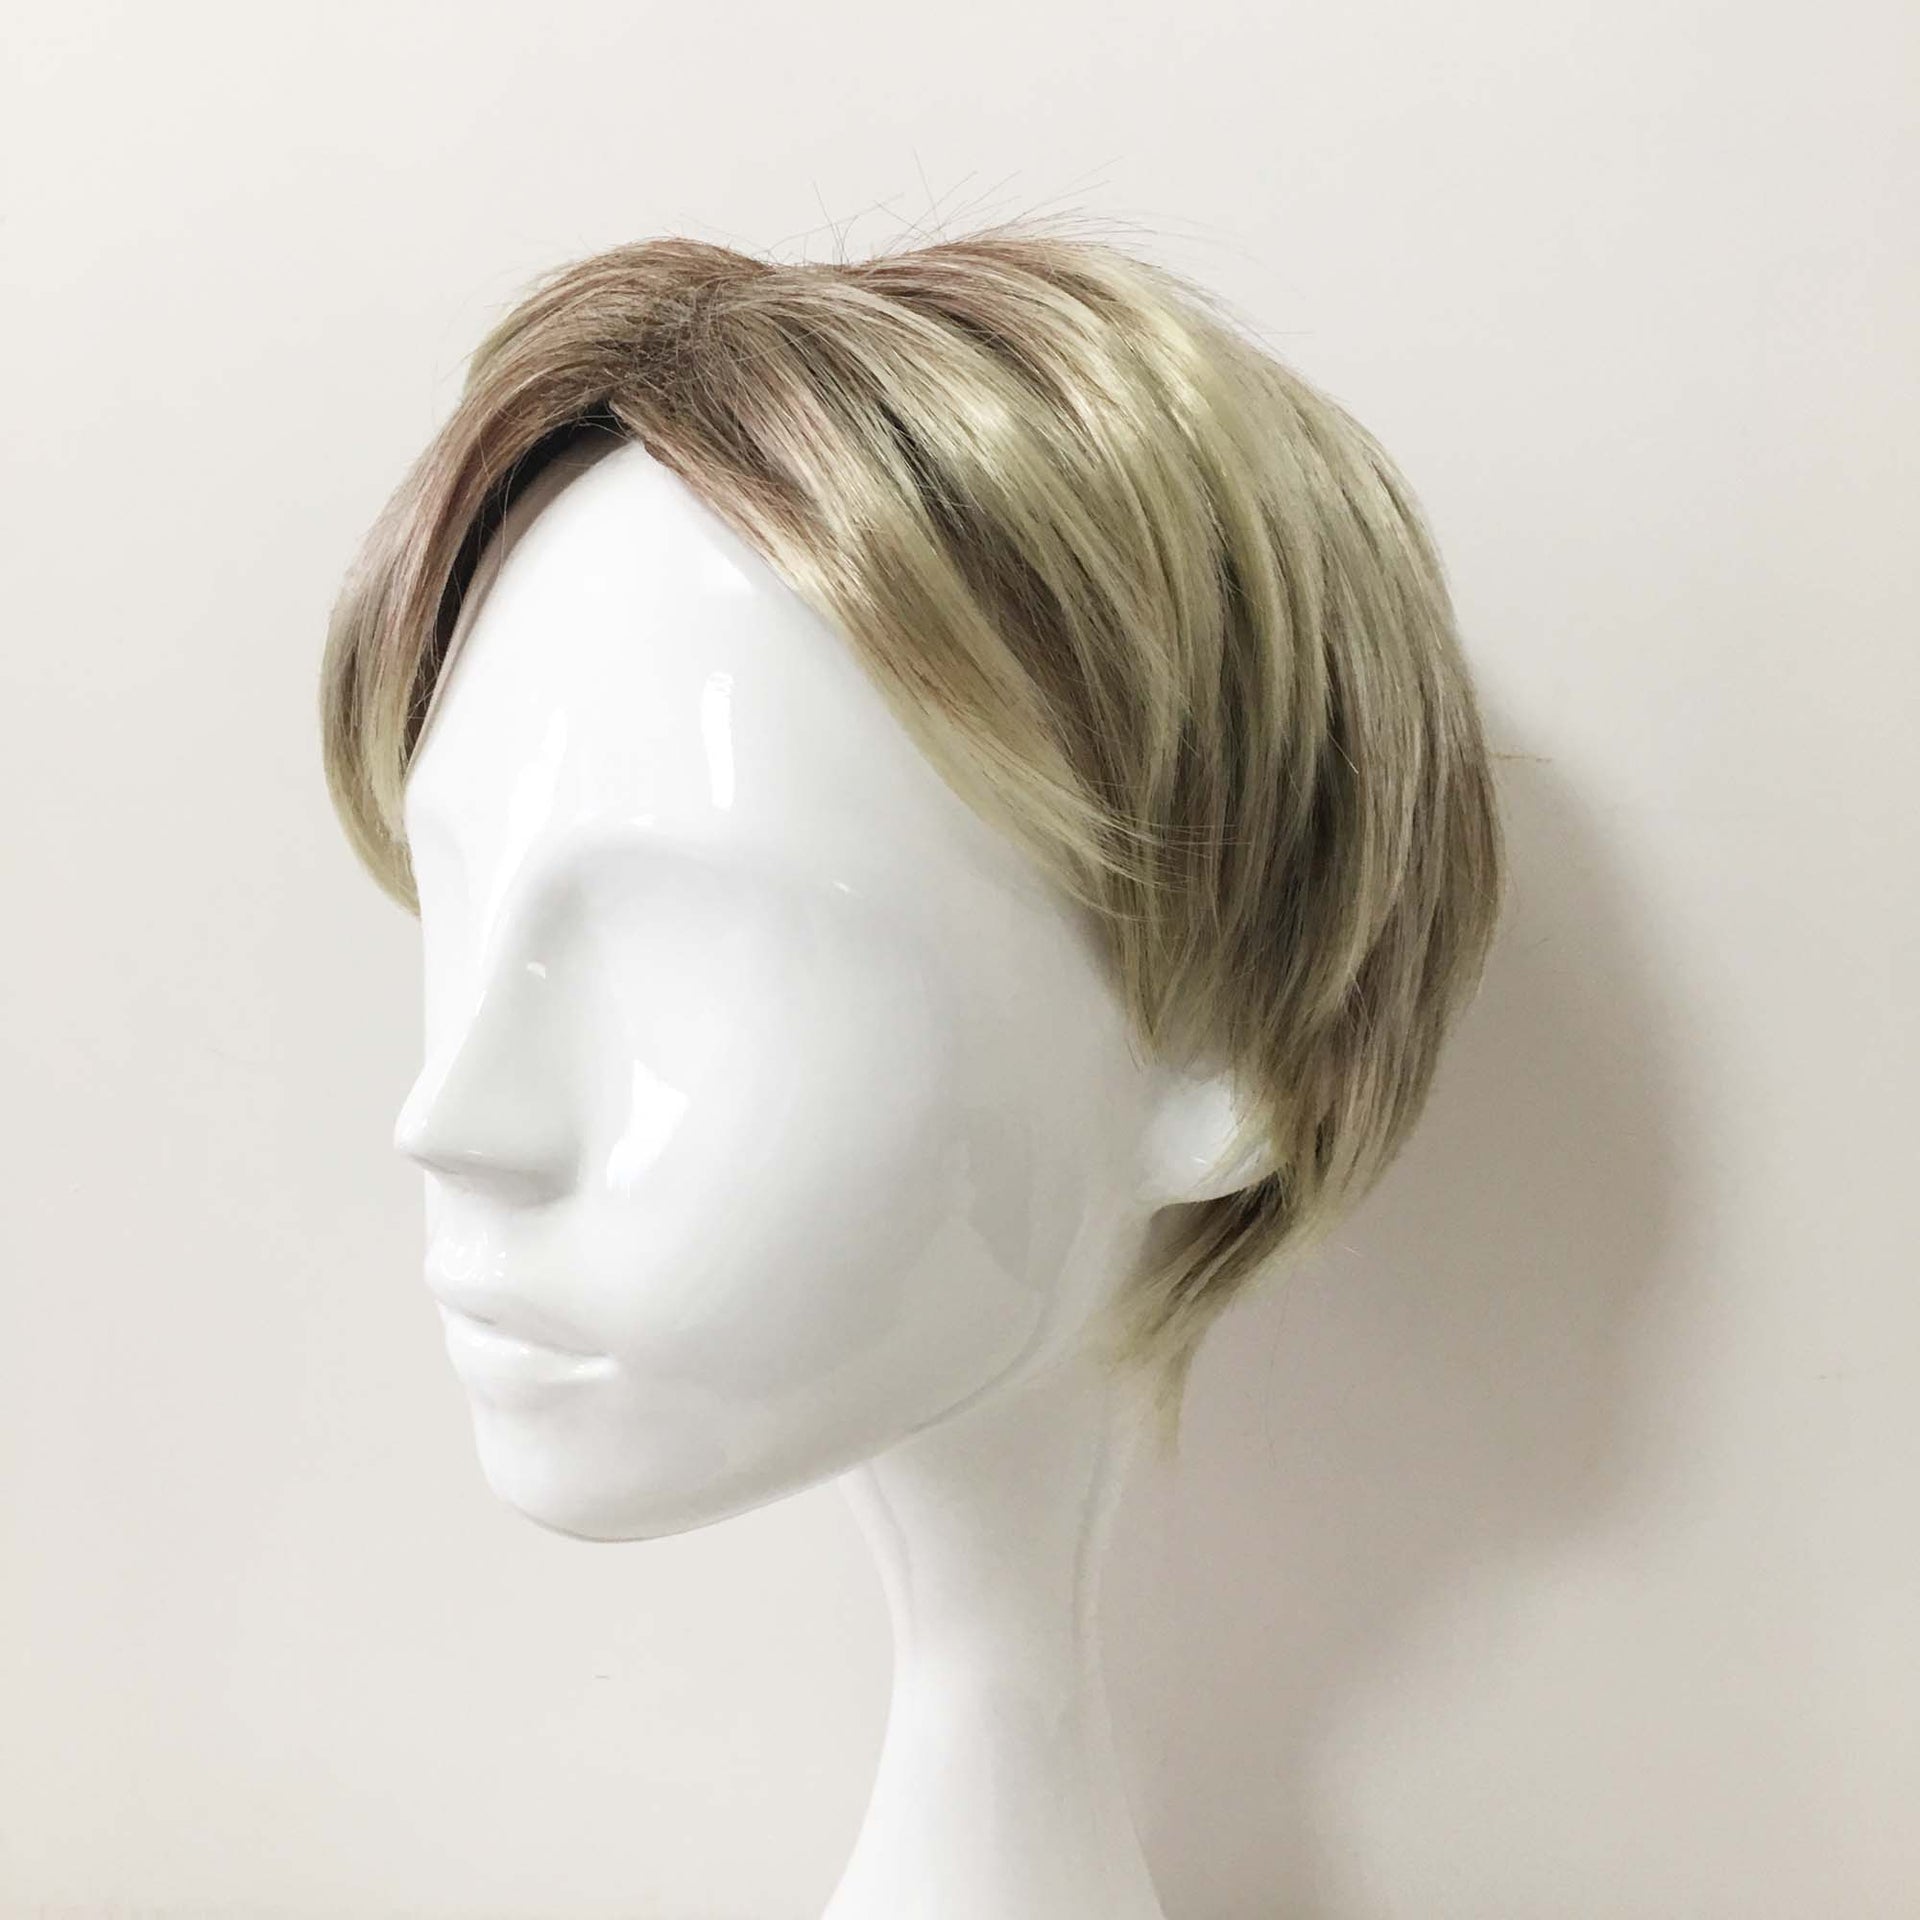 nevermindyrhead Men Ash Blonde Short Straight Pixie Middle Part Cosplay Wig